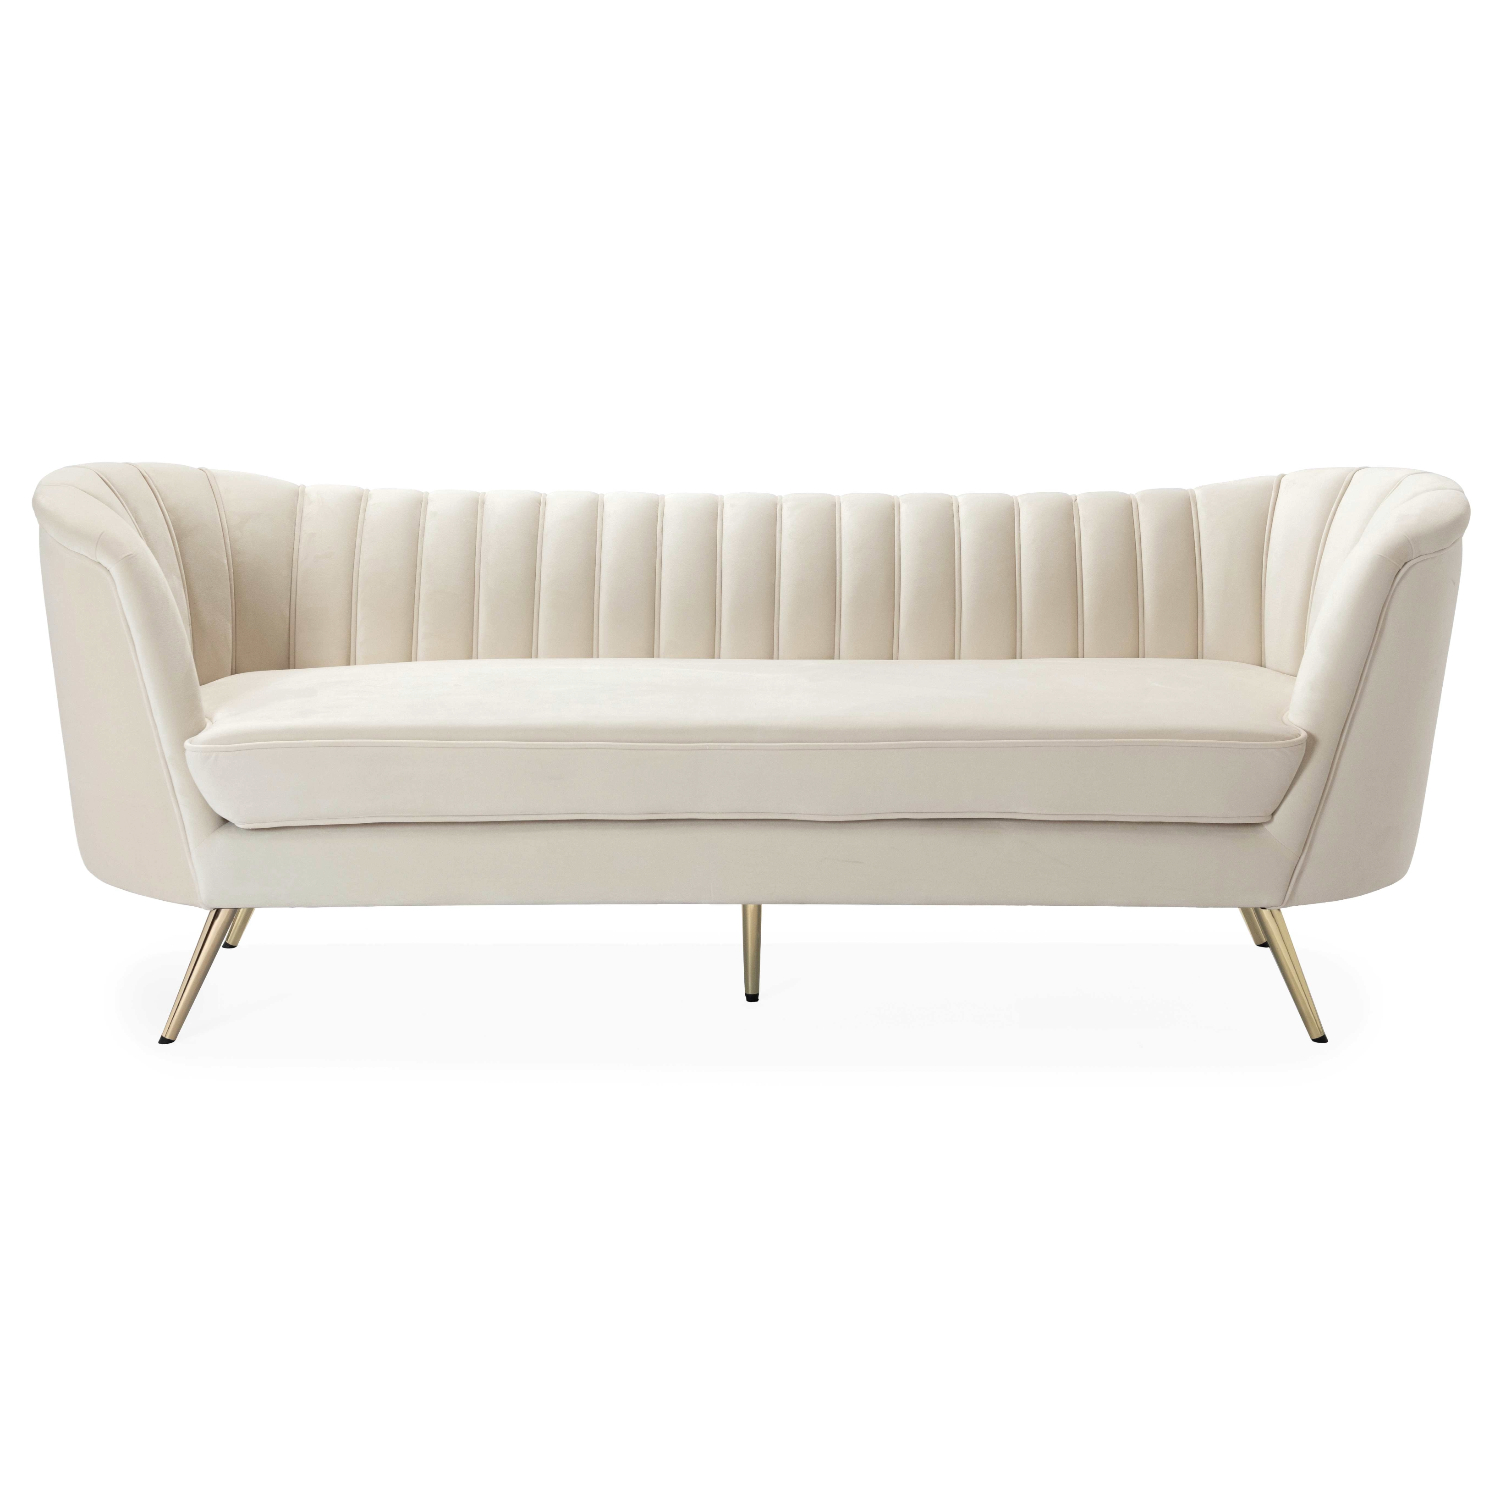 Pasha Sofa | Event Effects Group